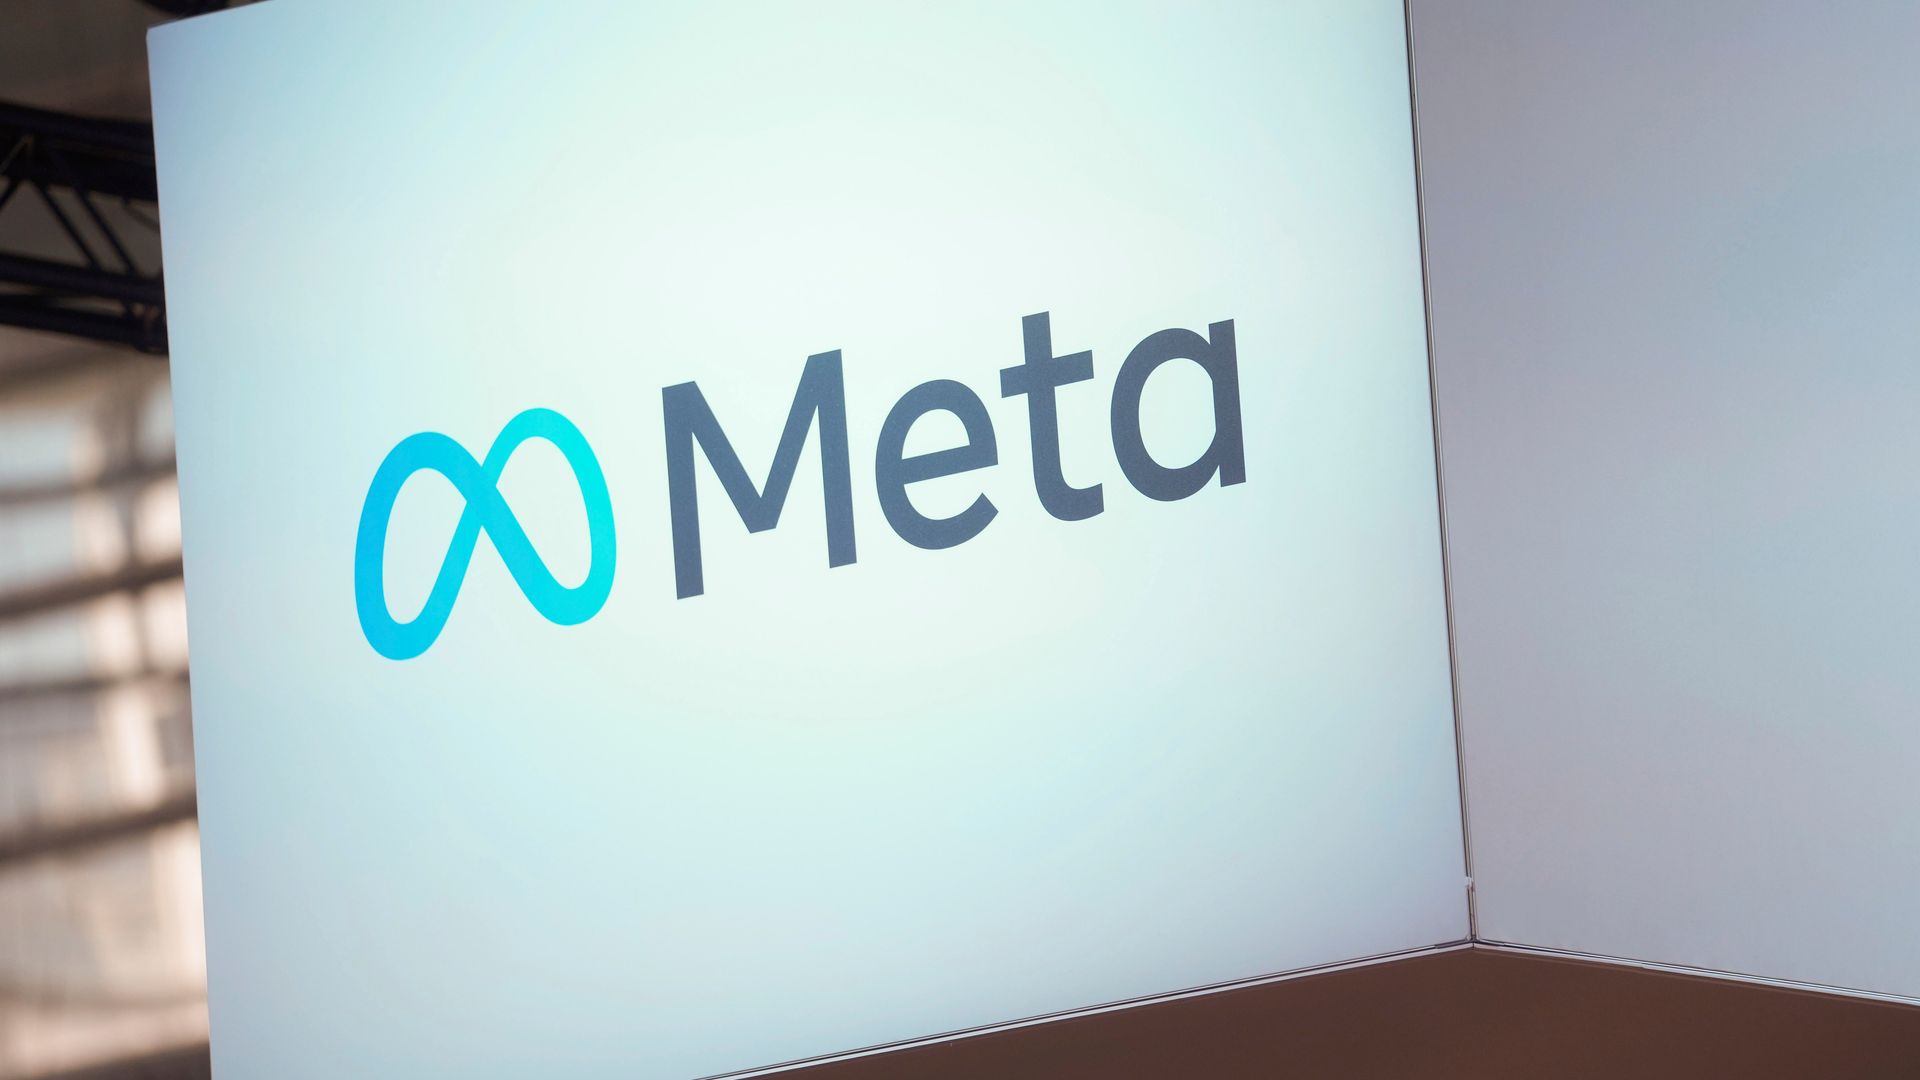 Meta unveils plans to enhance safety measures for young users on its platforms, including restrictive settings and content filters.